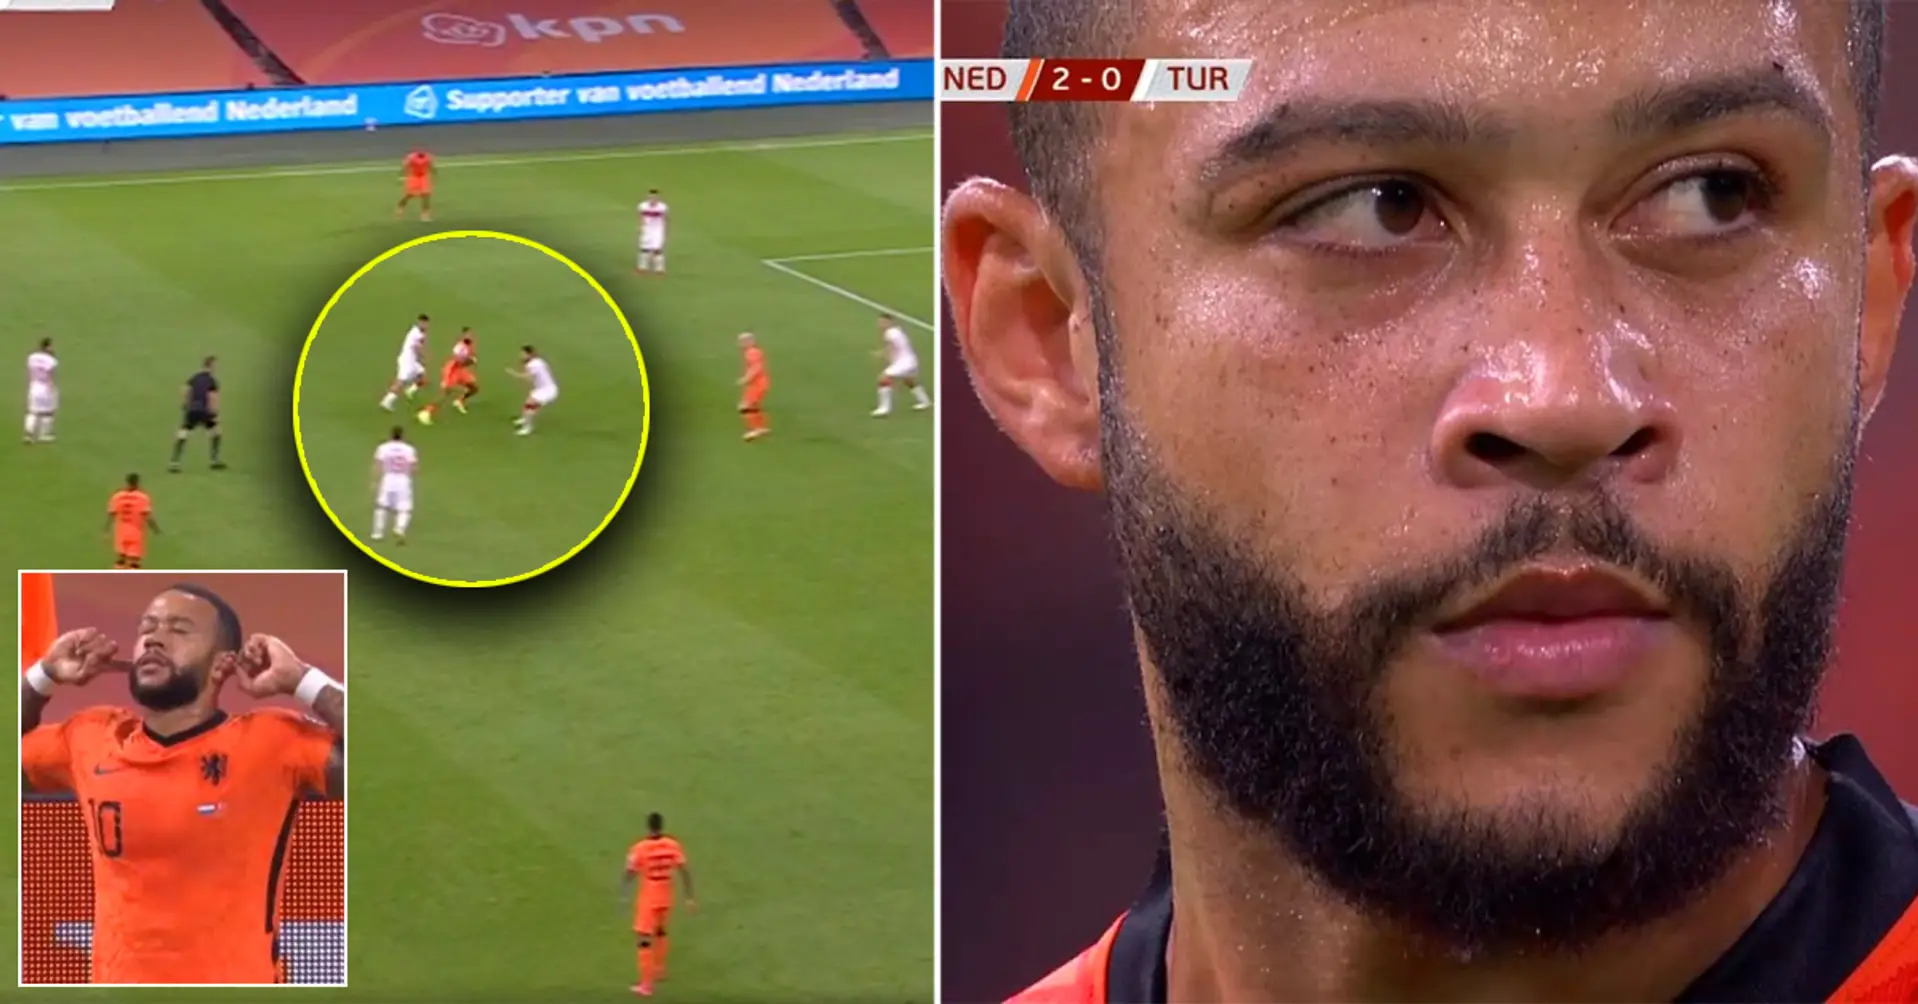 Memphis Depay scores a world-class goal for Holland, even his teammates look stunned